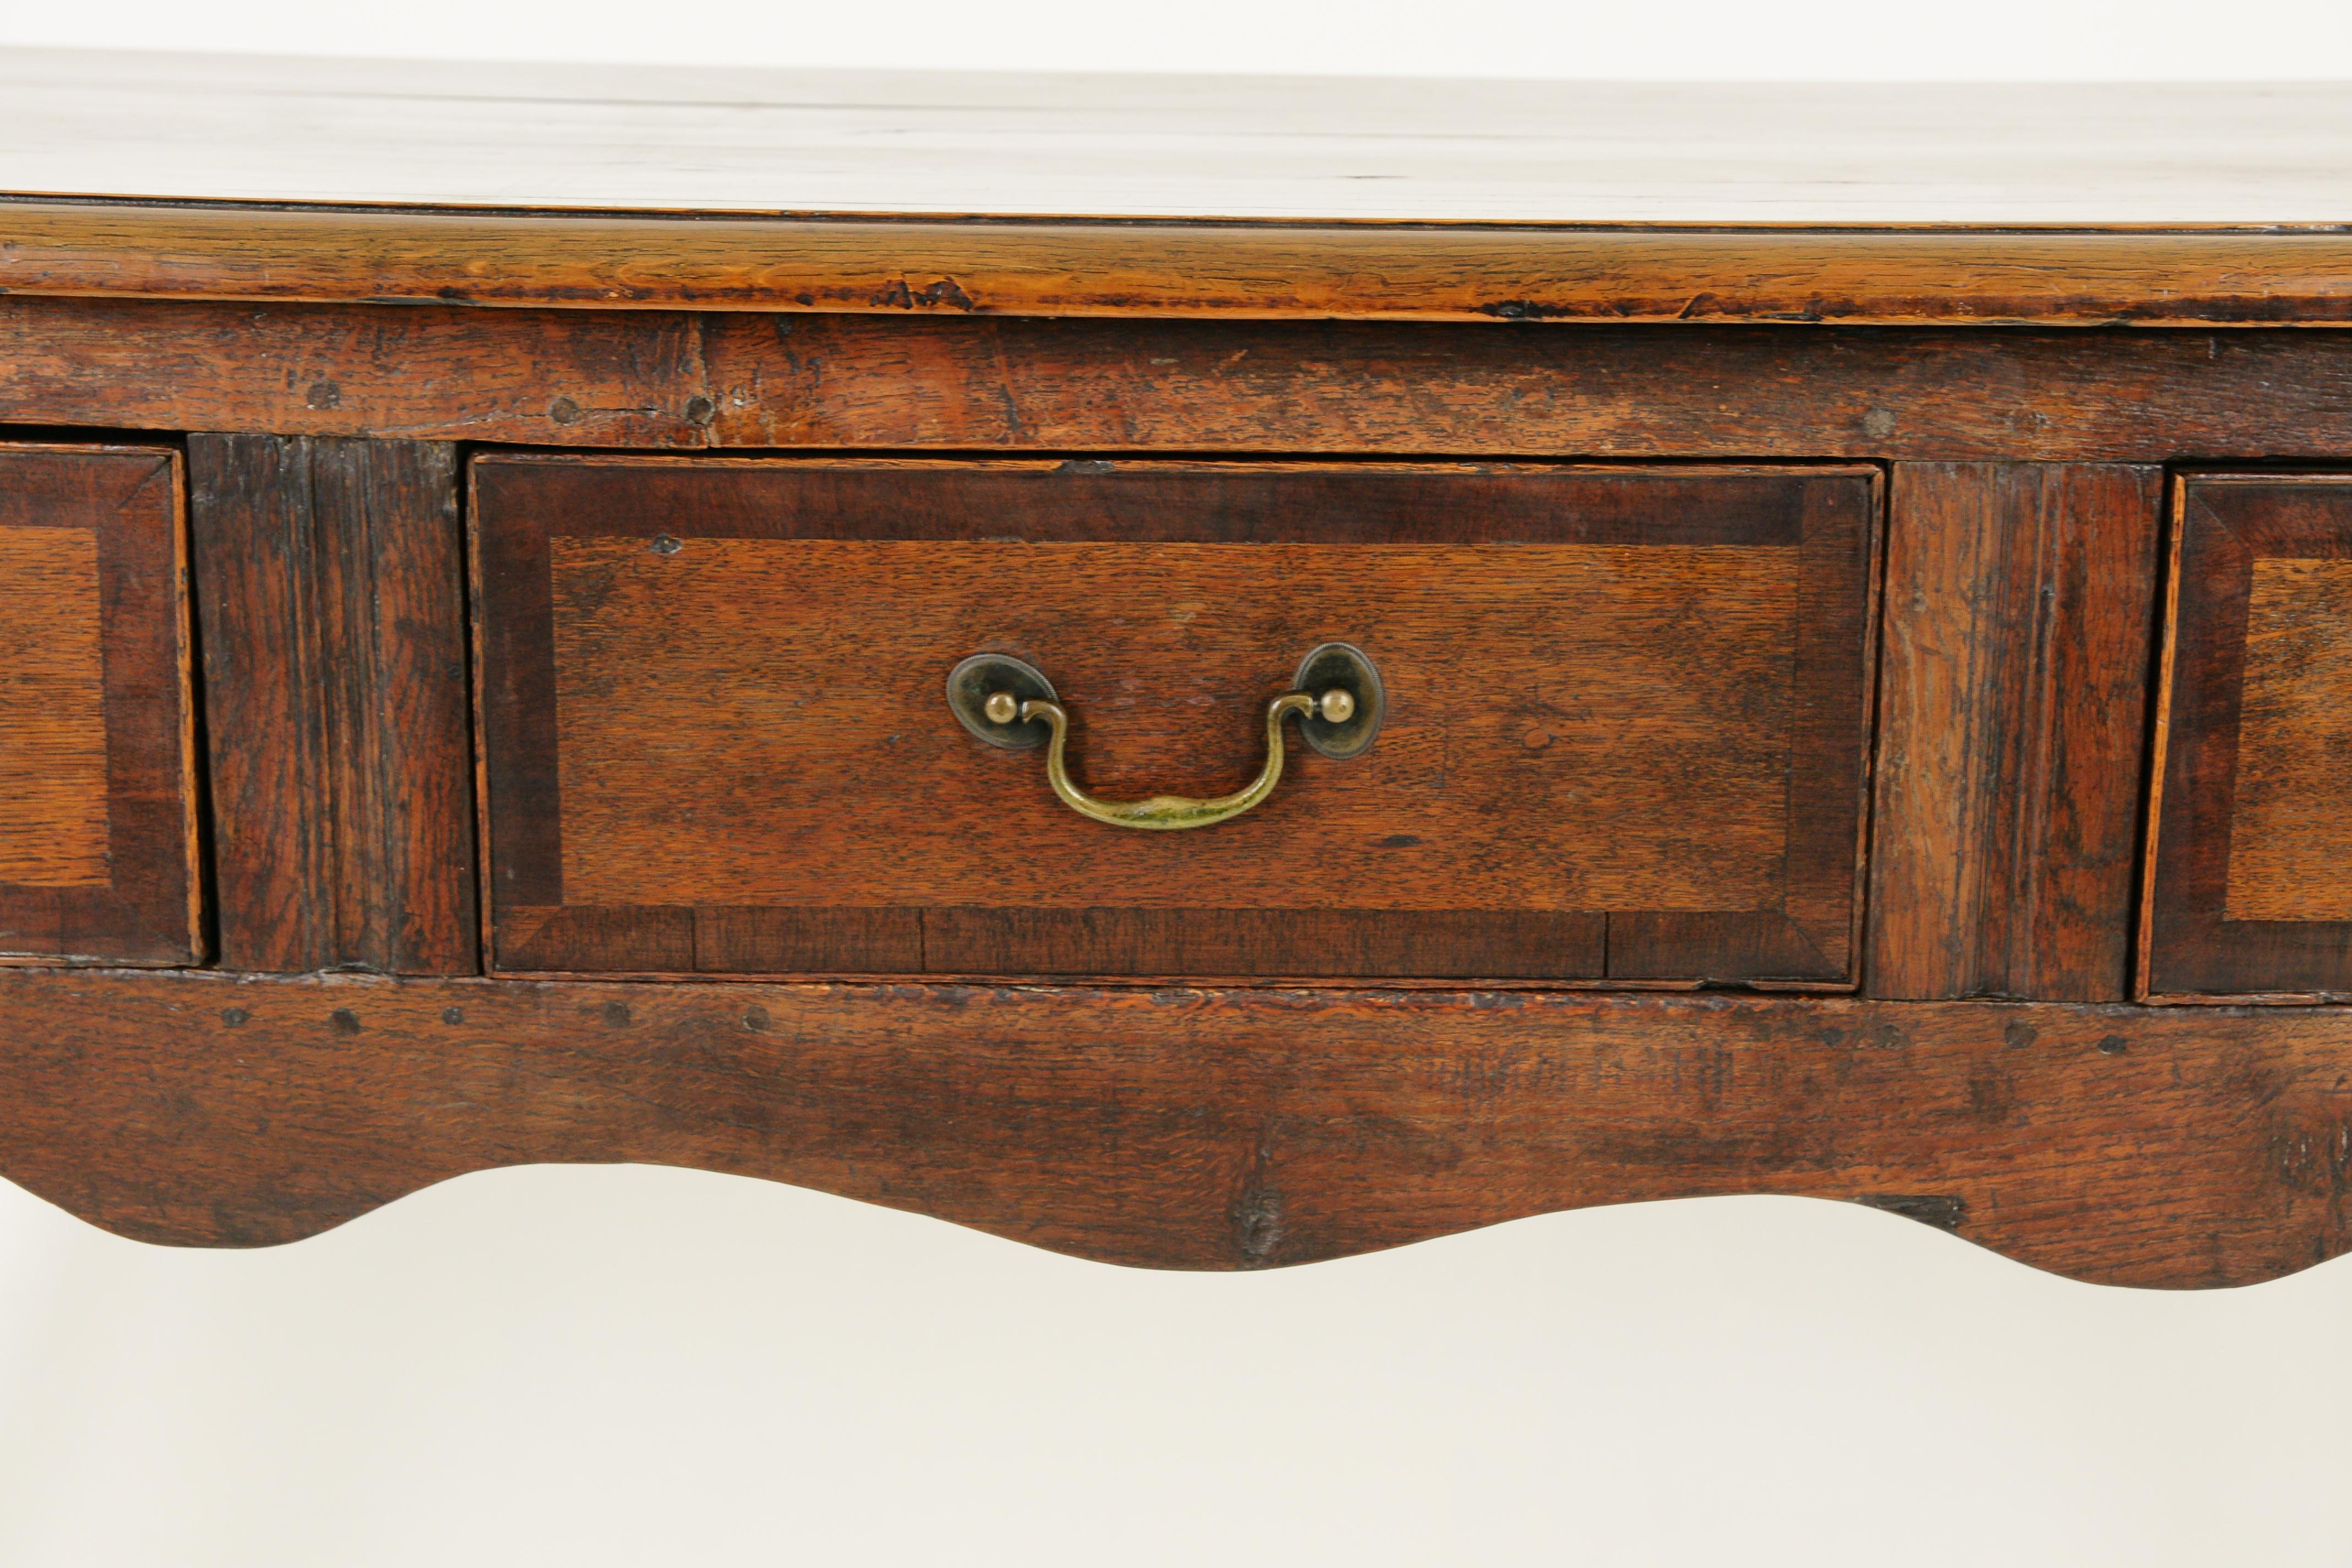 Antique oak dresser base, Georgian sideboard, Antique Furniture, Scotland 1790, B1668

Scotland 1790
Oak moulded top
Three original cross bonded drawers with old hardware (not original)
Shaped apron below
Panelled sides
Supported by tall